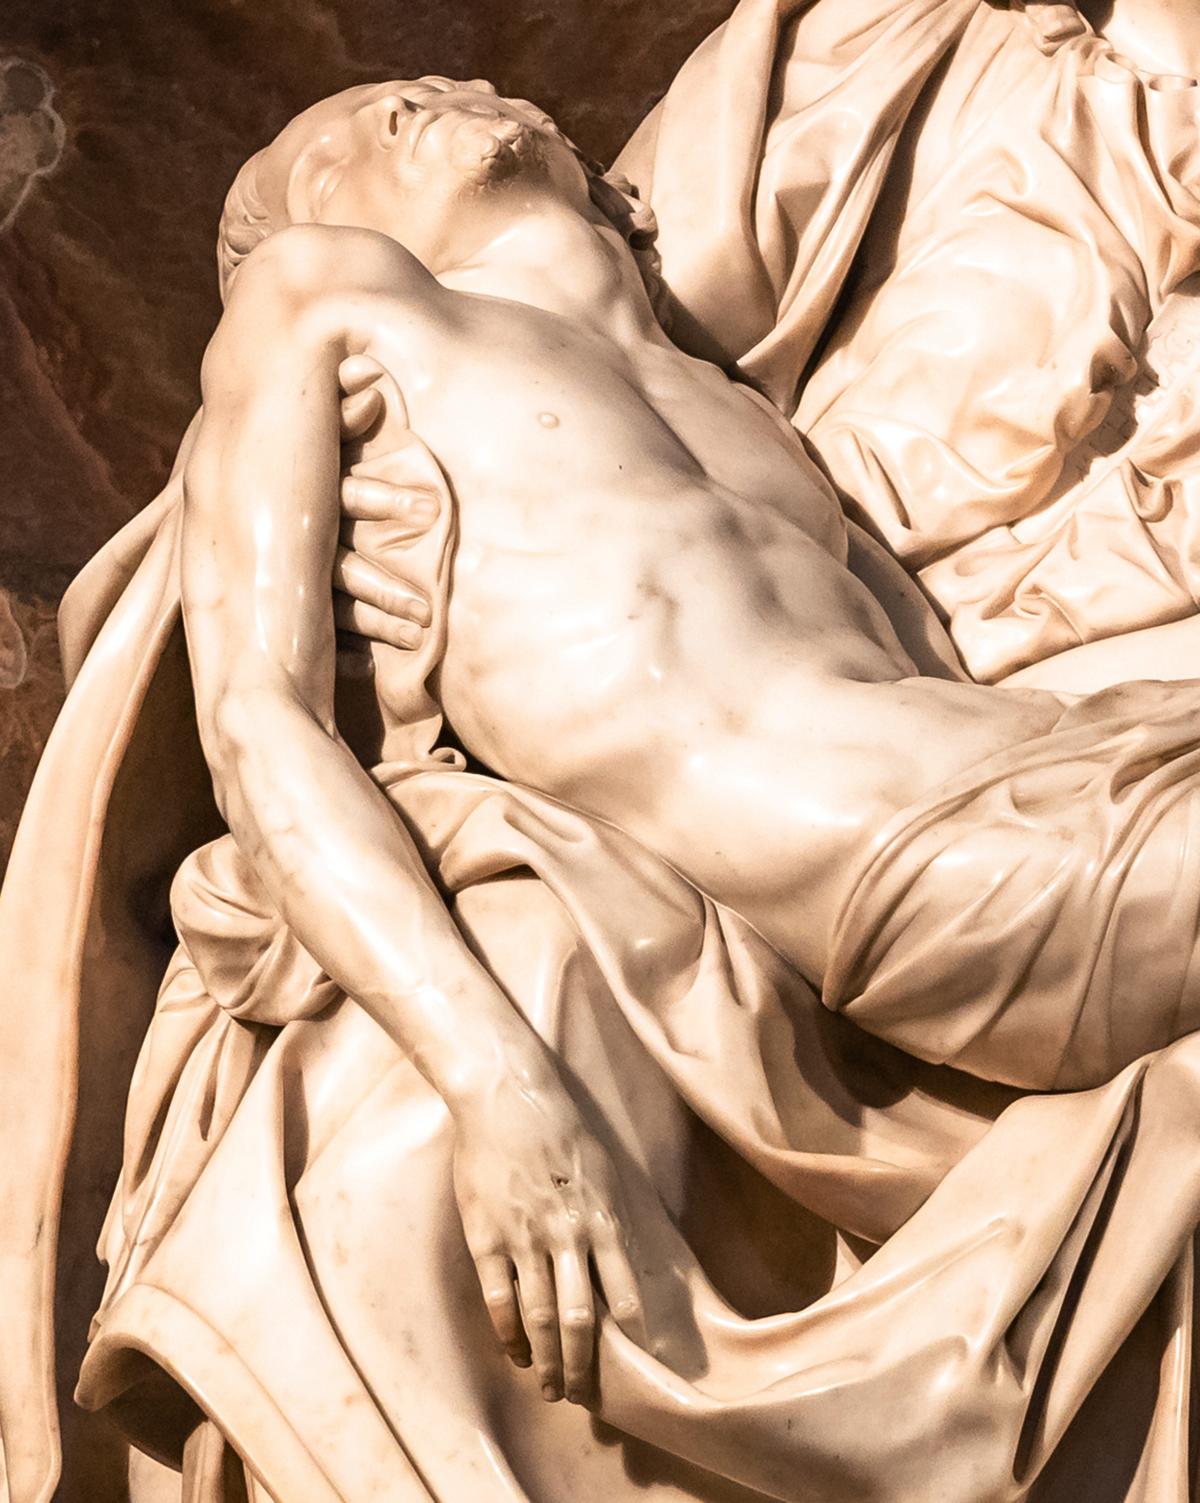 A detail of Jesus from Michelangelo's "Pietà." (PhotoFires/Shutterstock)